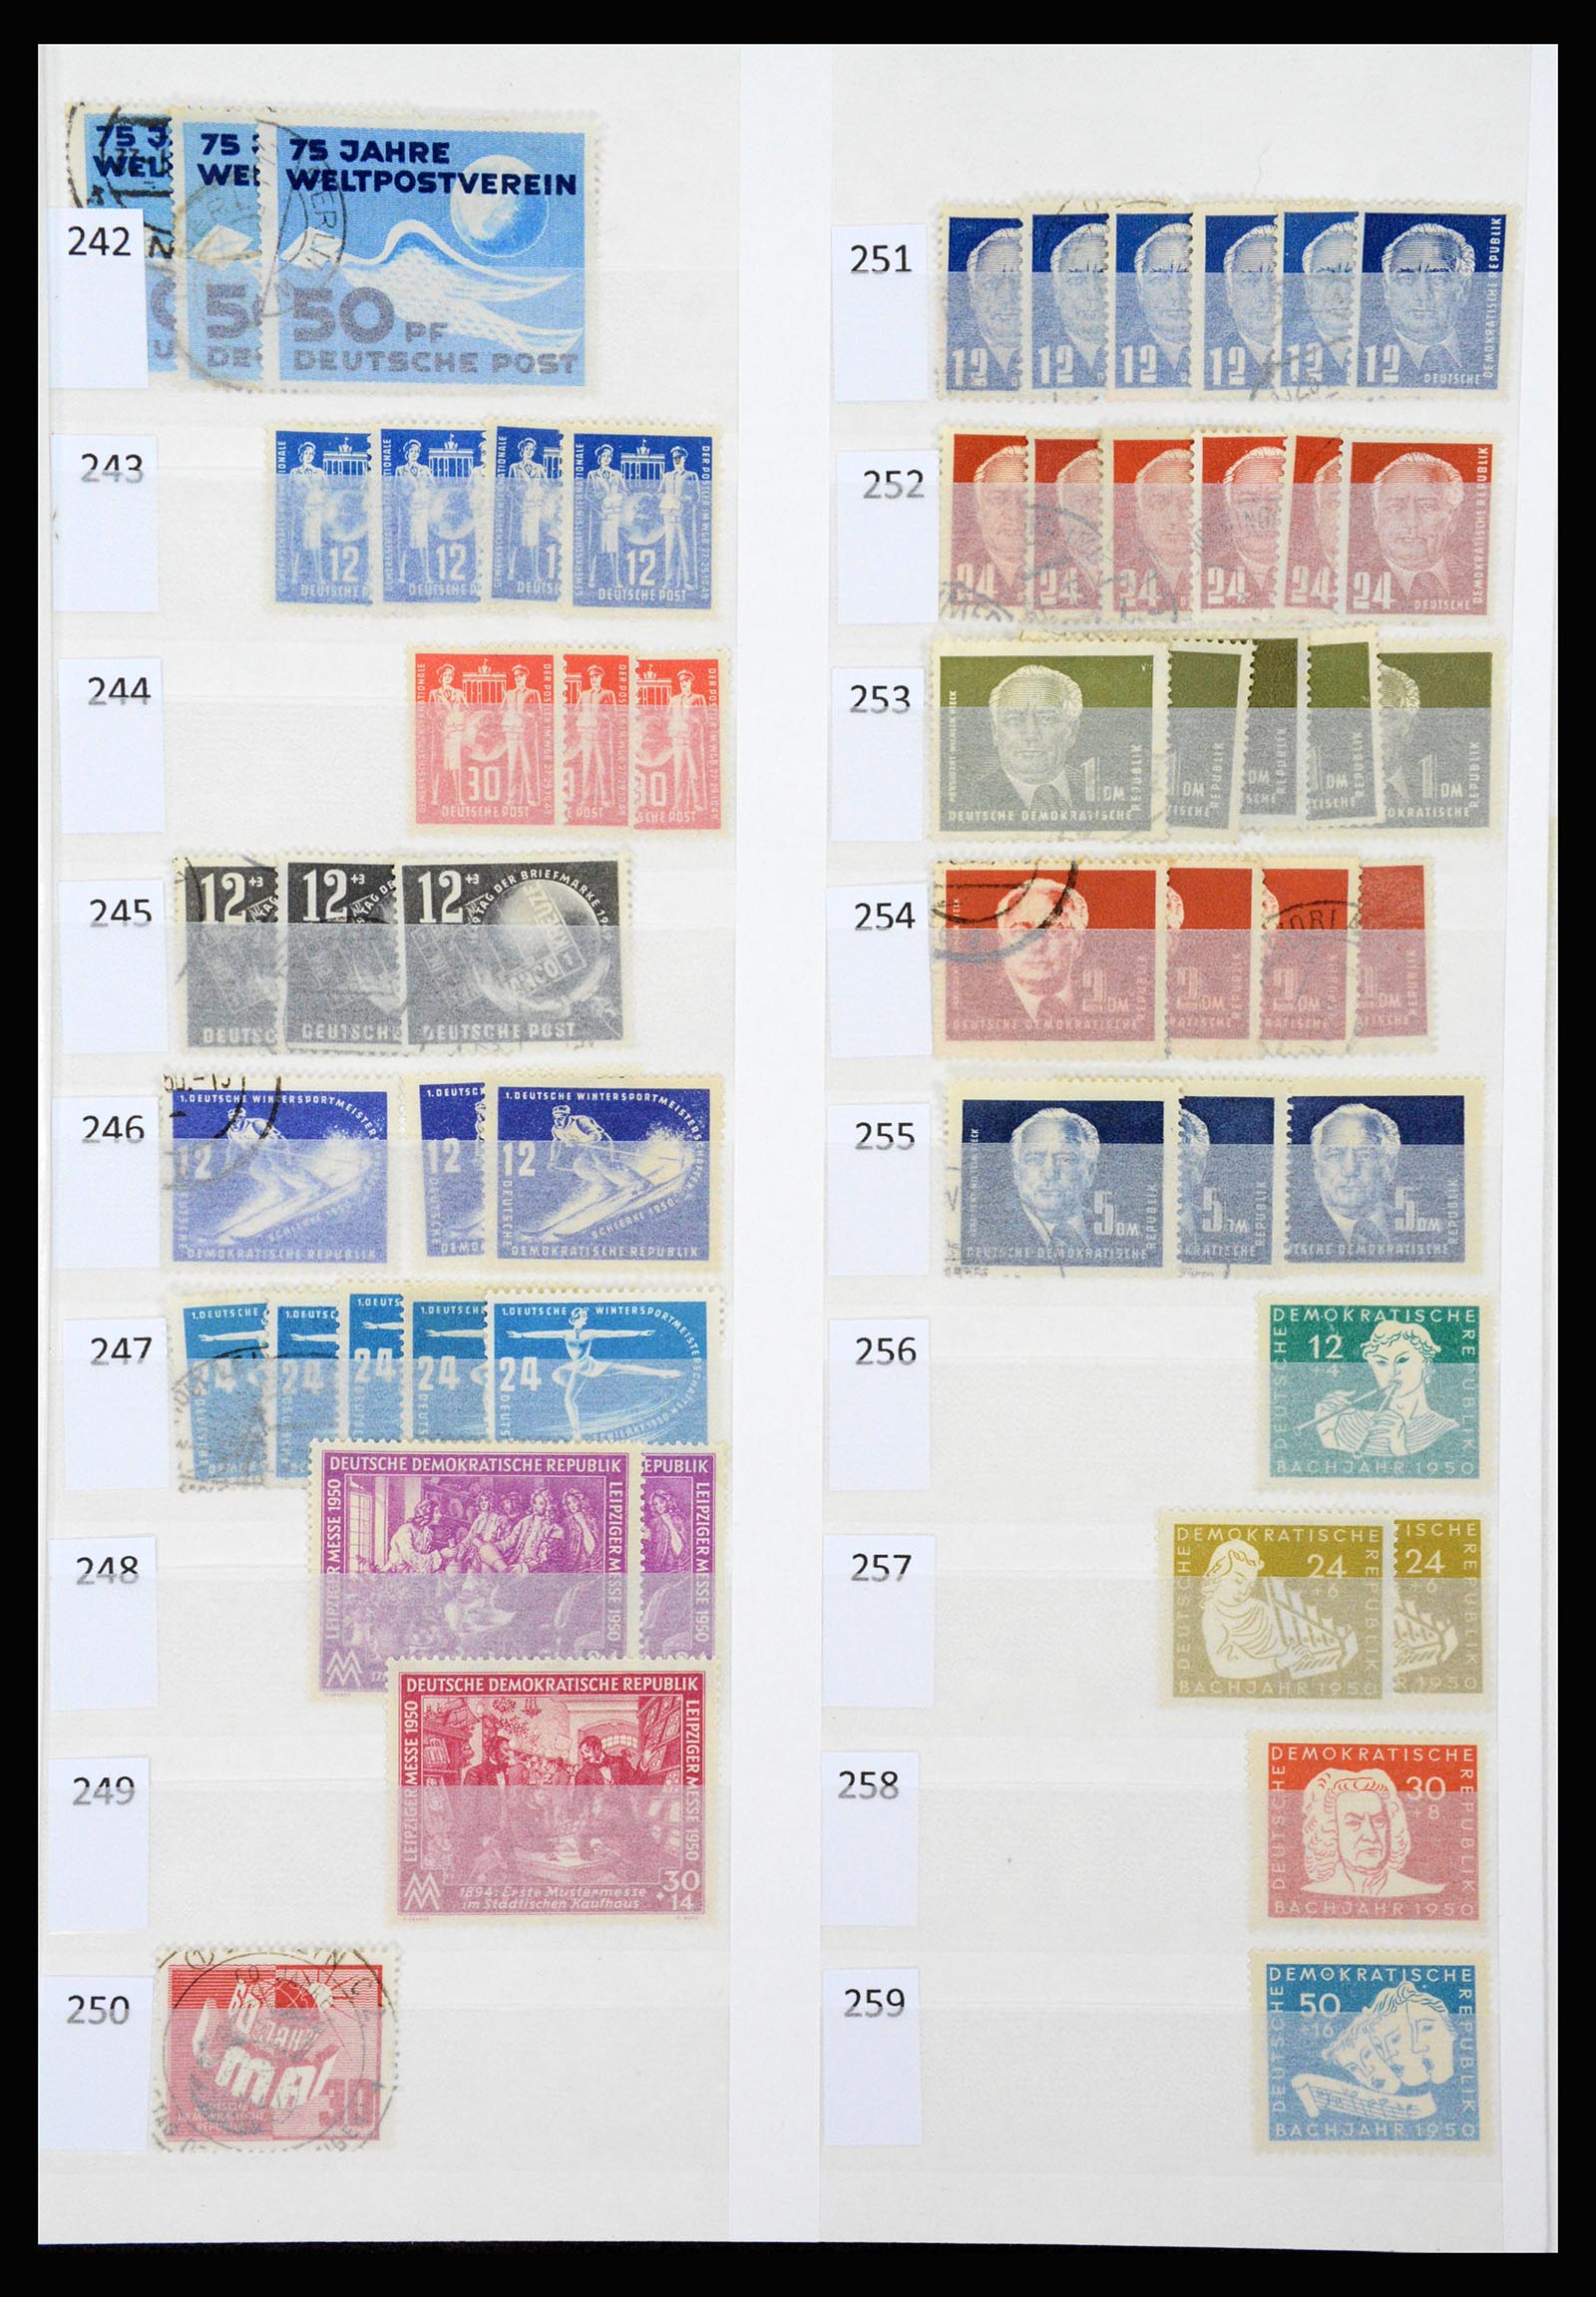 37253 001 - Stamp collection 37253 GDR 1949-1990.